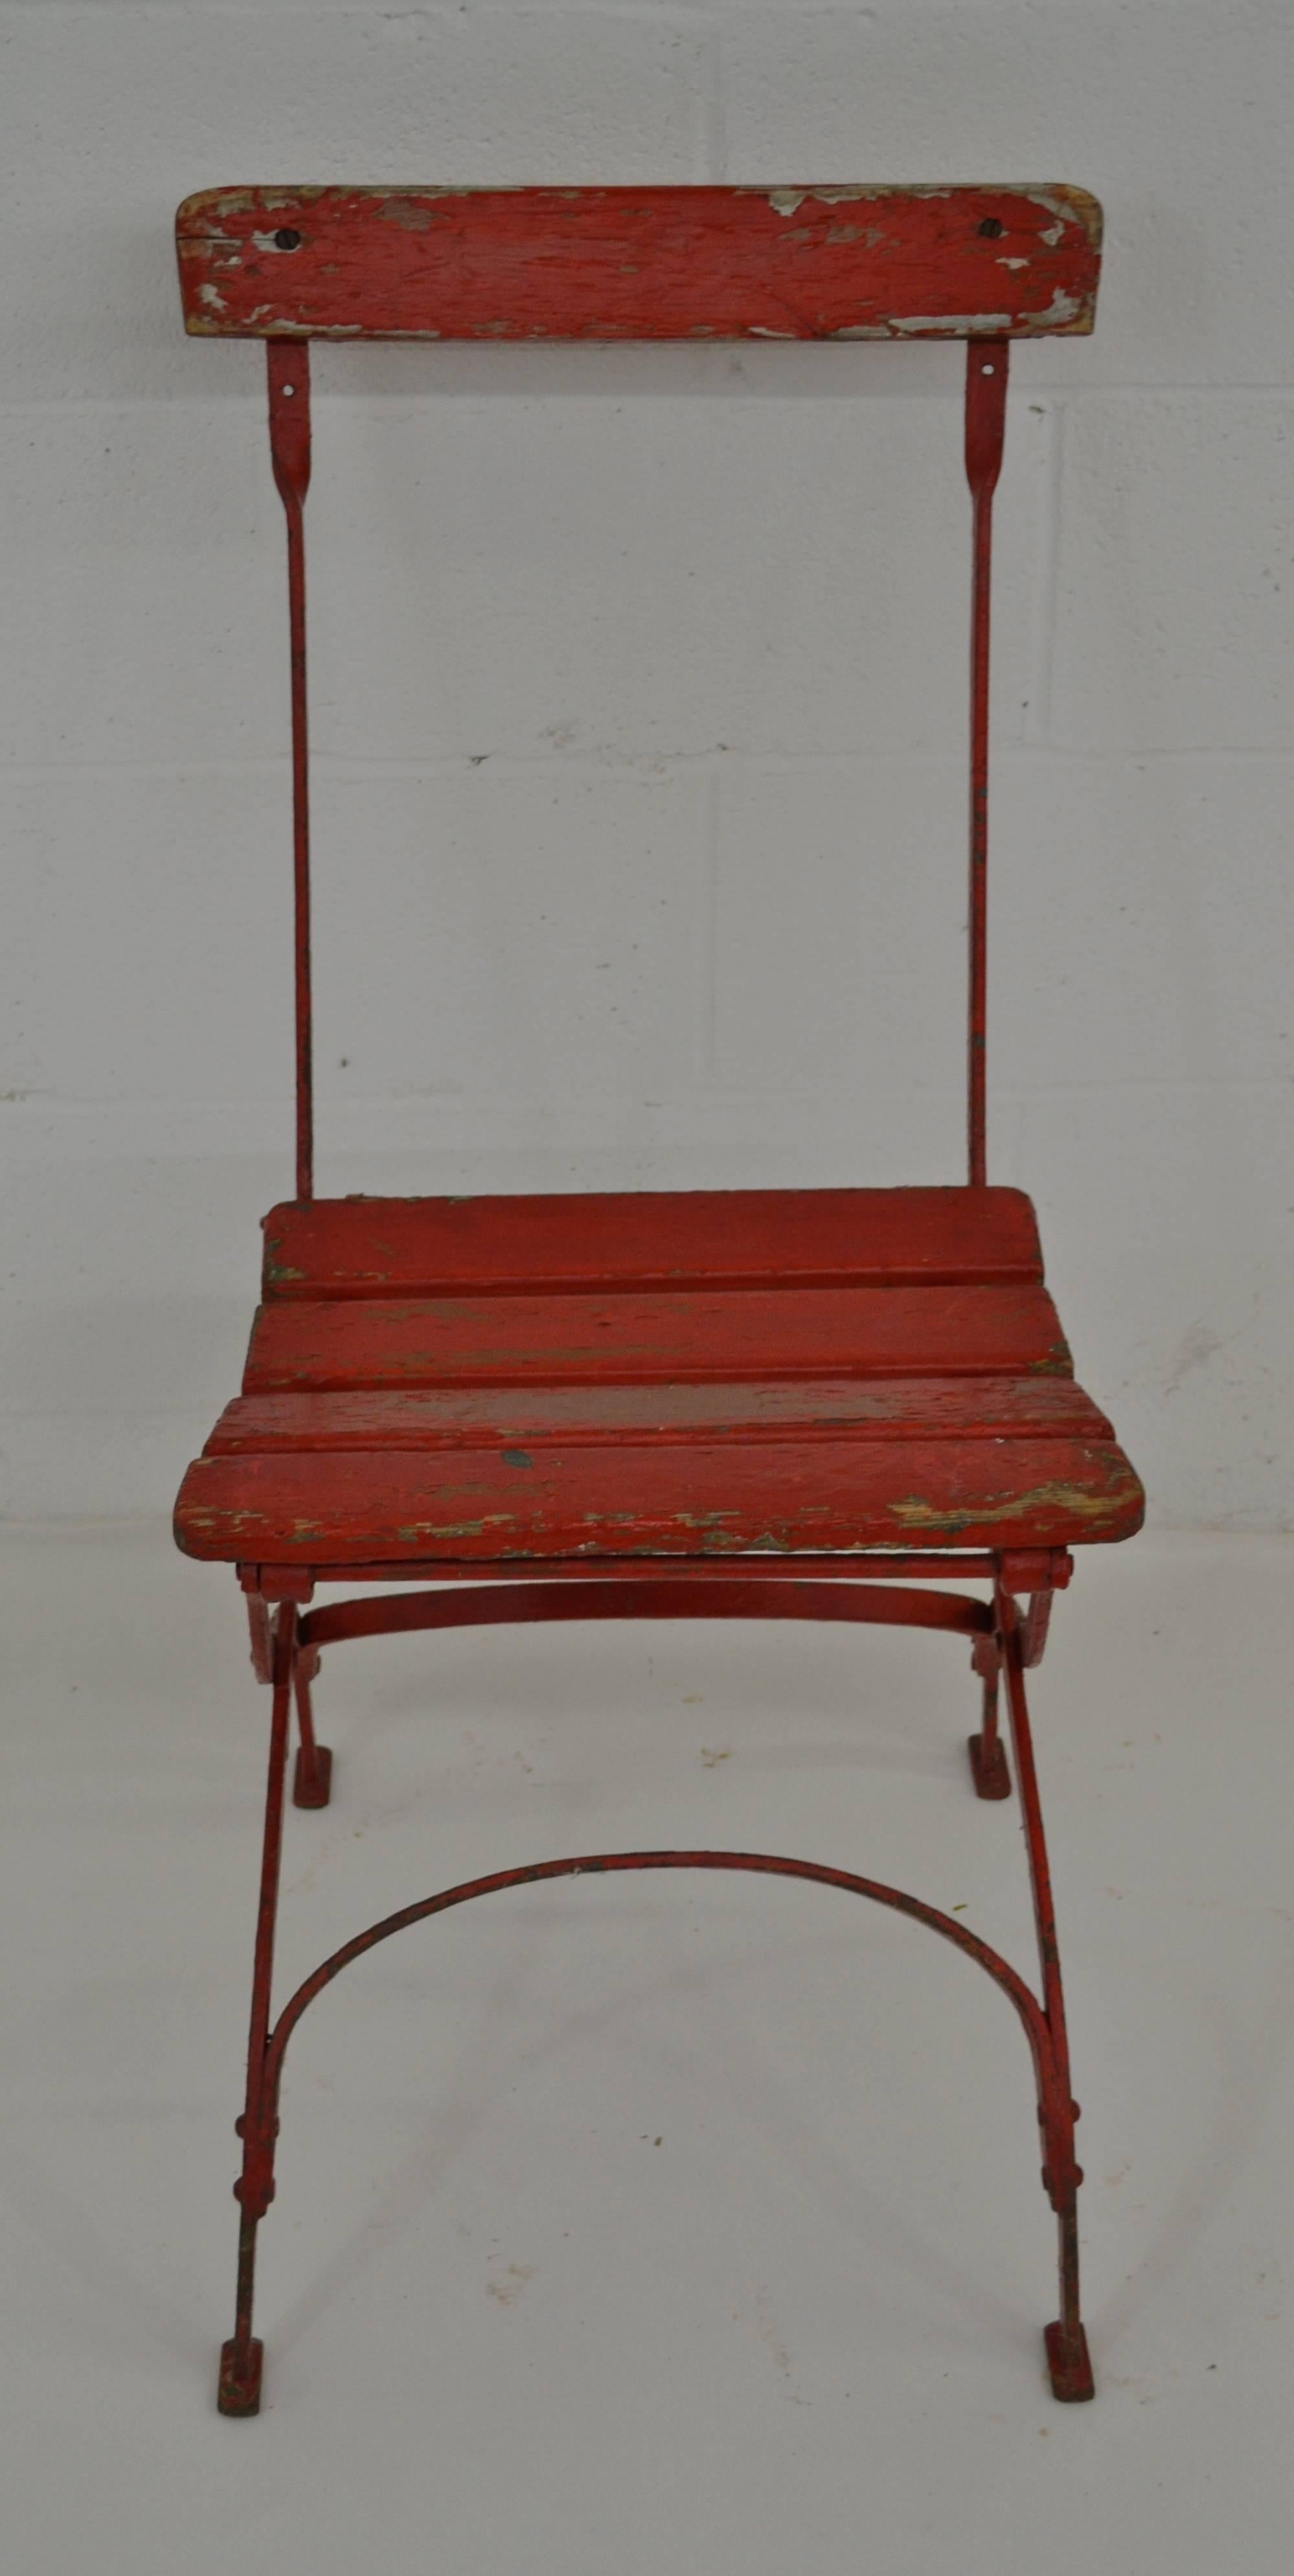 A wrought iron folding bistro chair with oak back rail and seat slats. In old very worn red paint on original green.